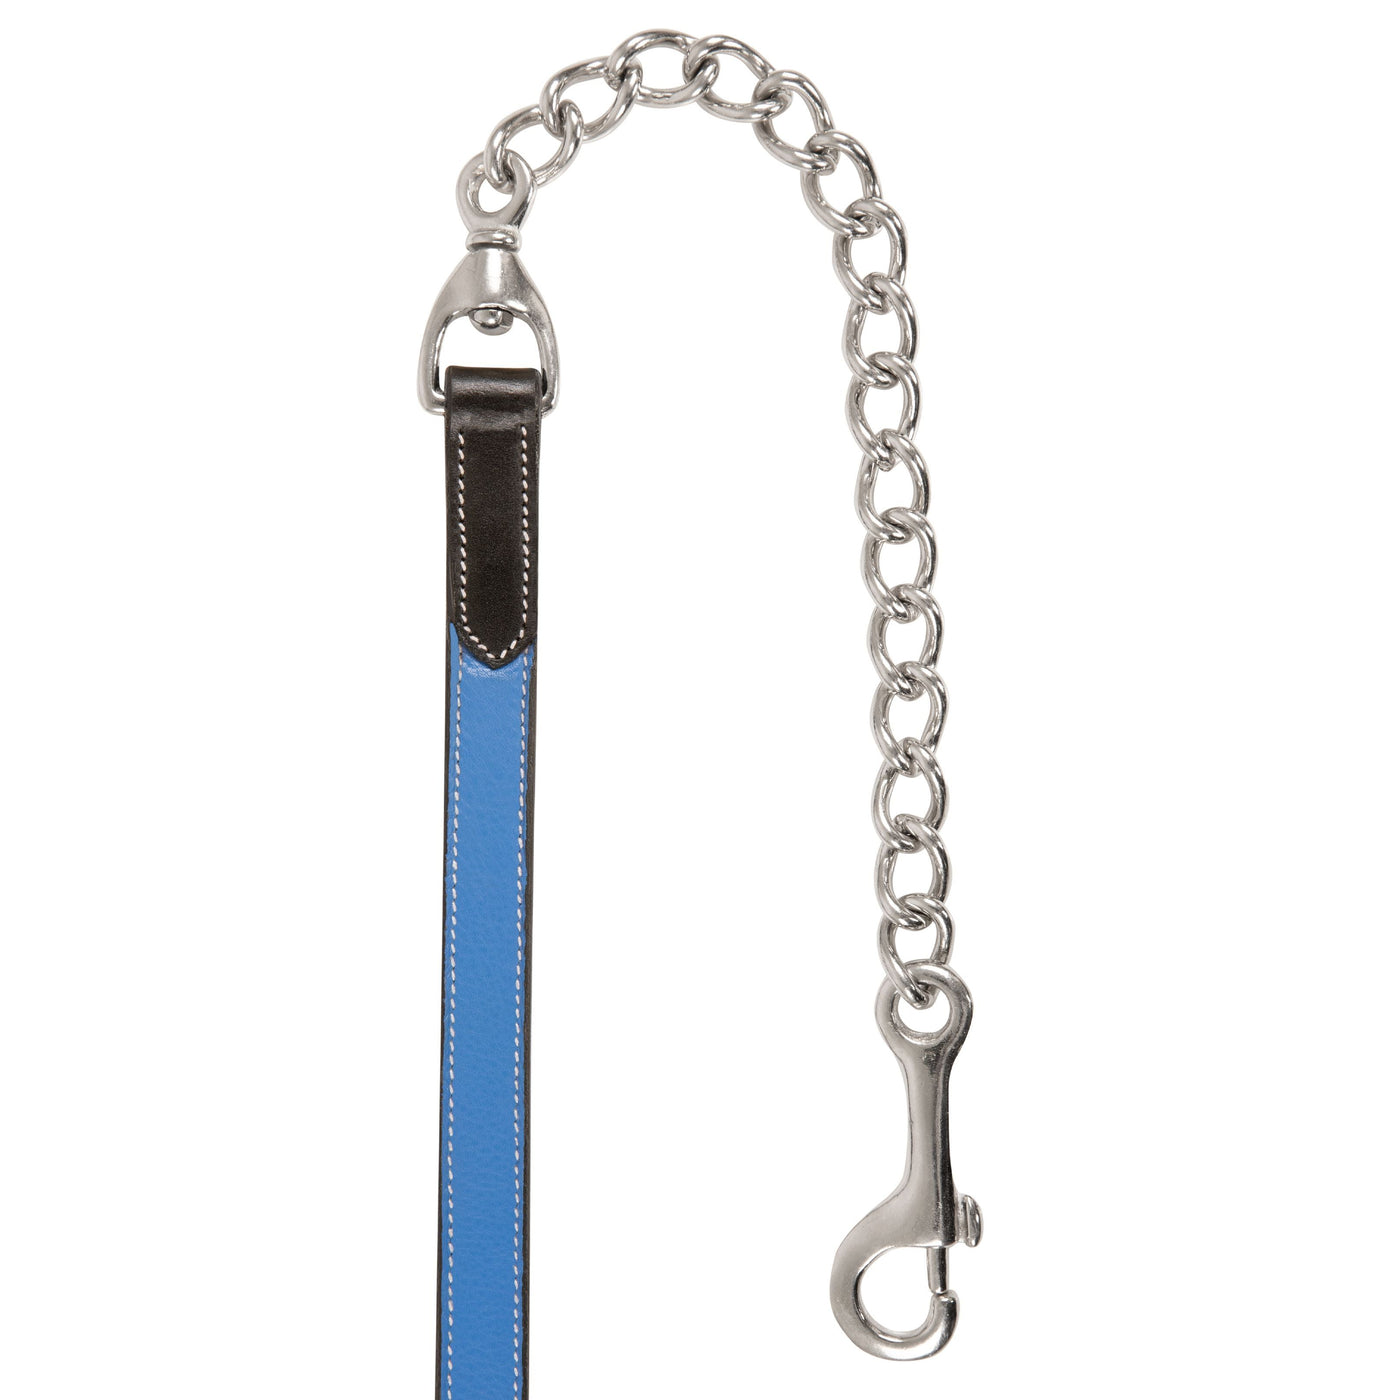 ExionPro Leather Soft Padded Blue Halter and Leather Lead with Chain Combo